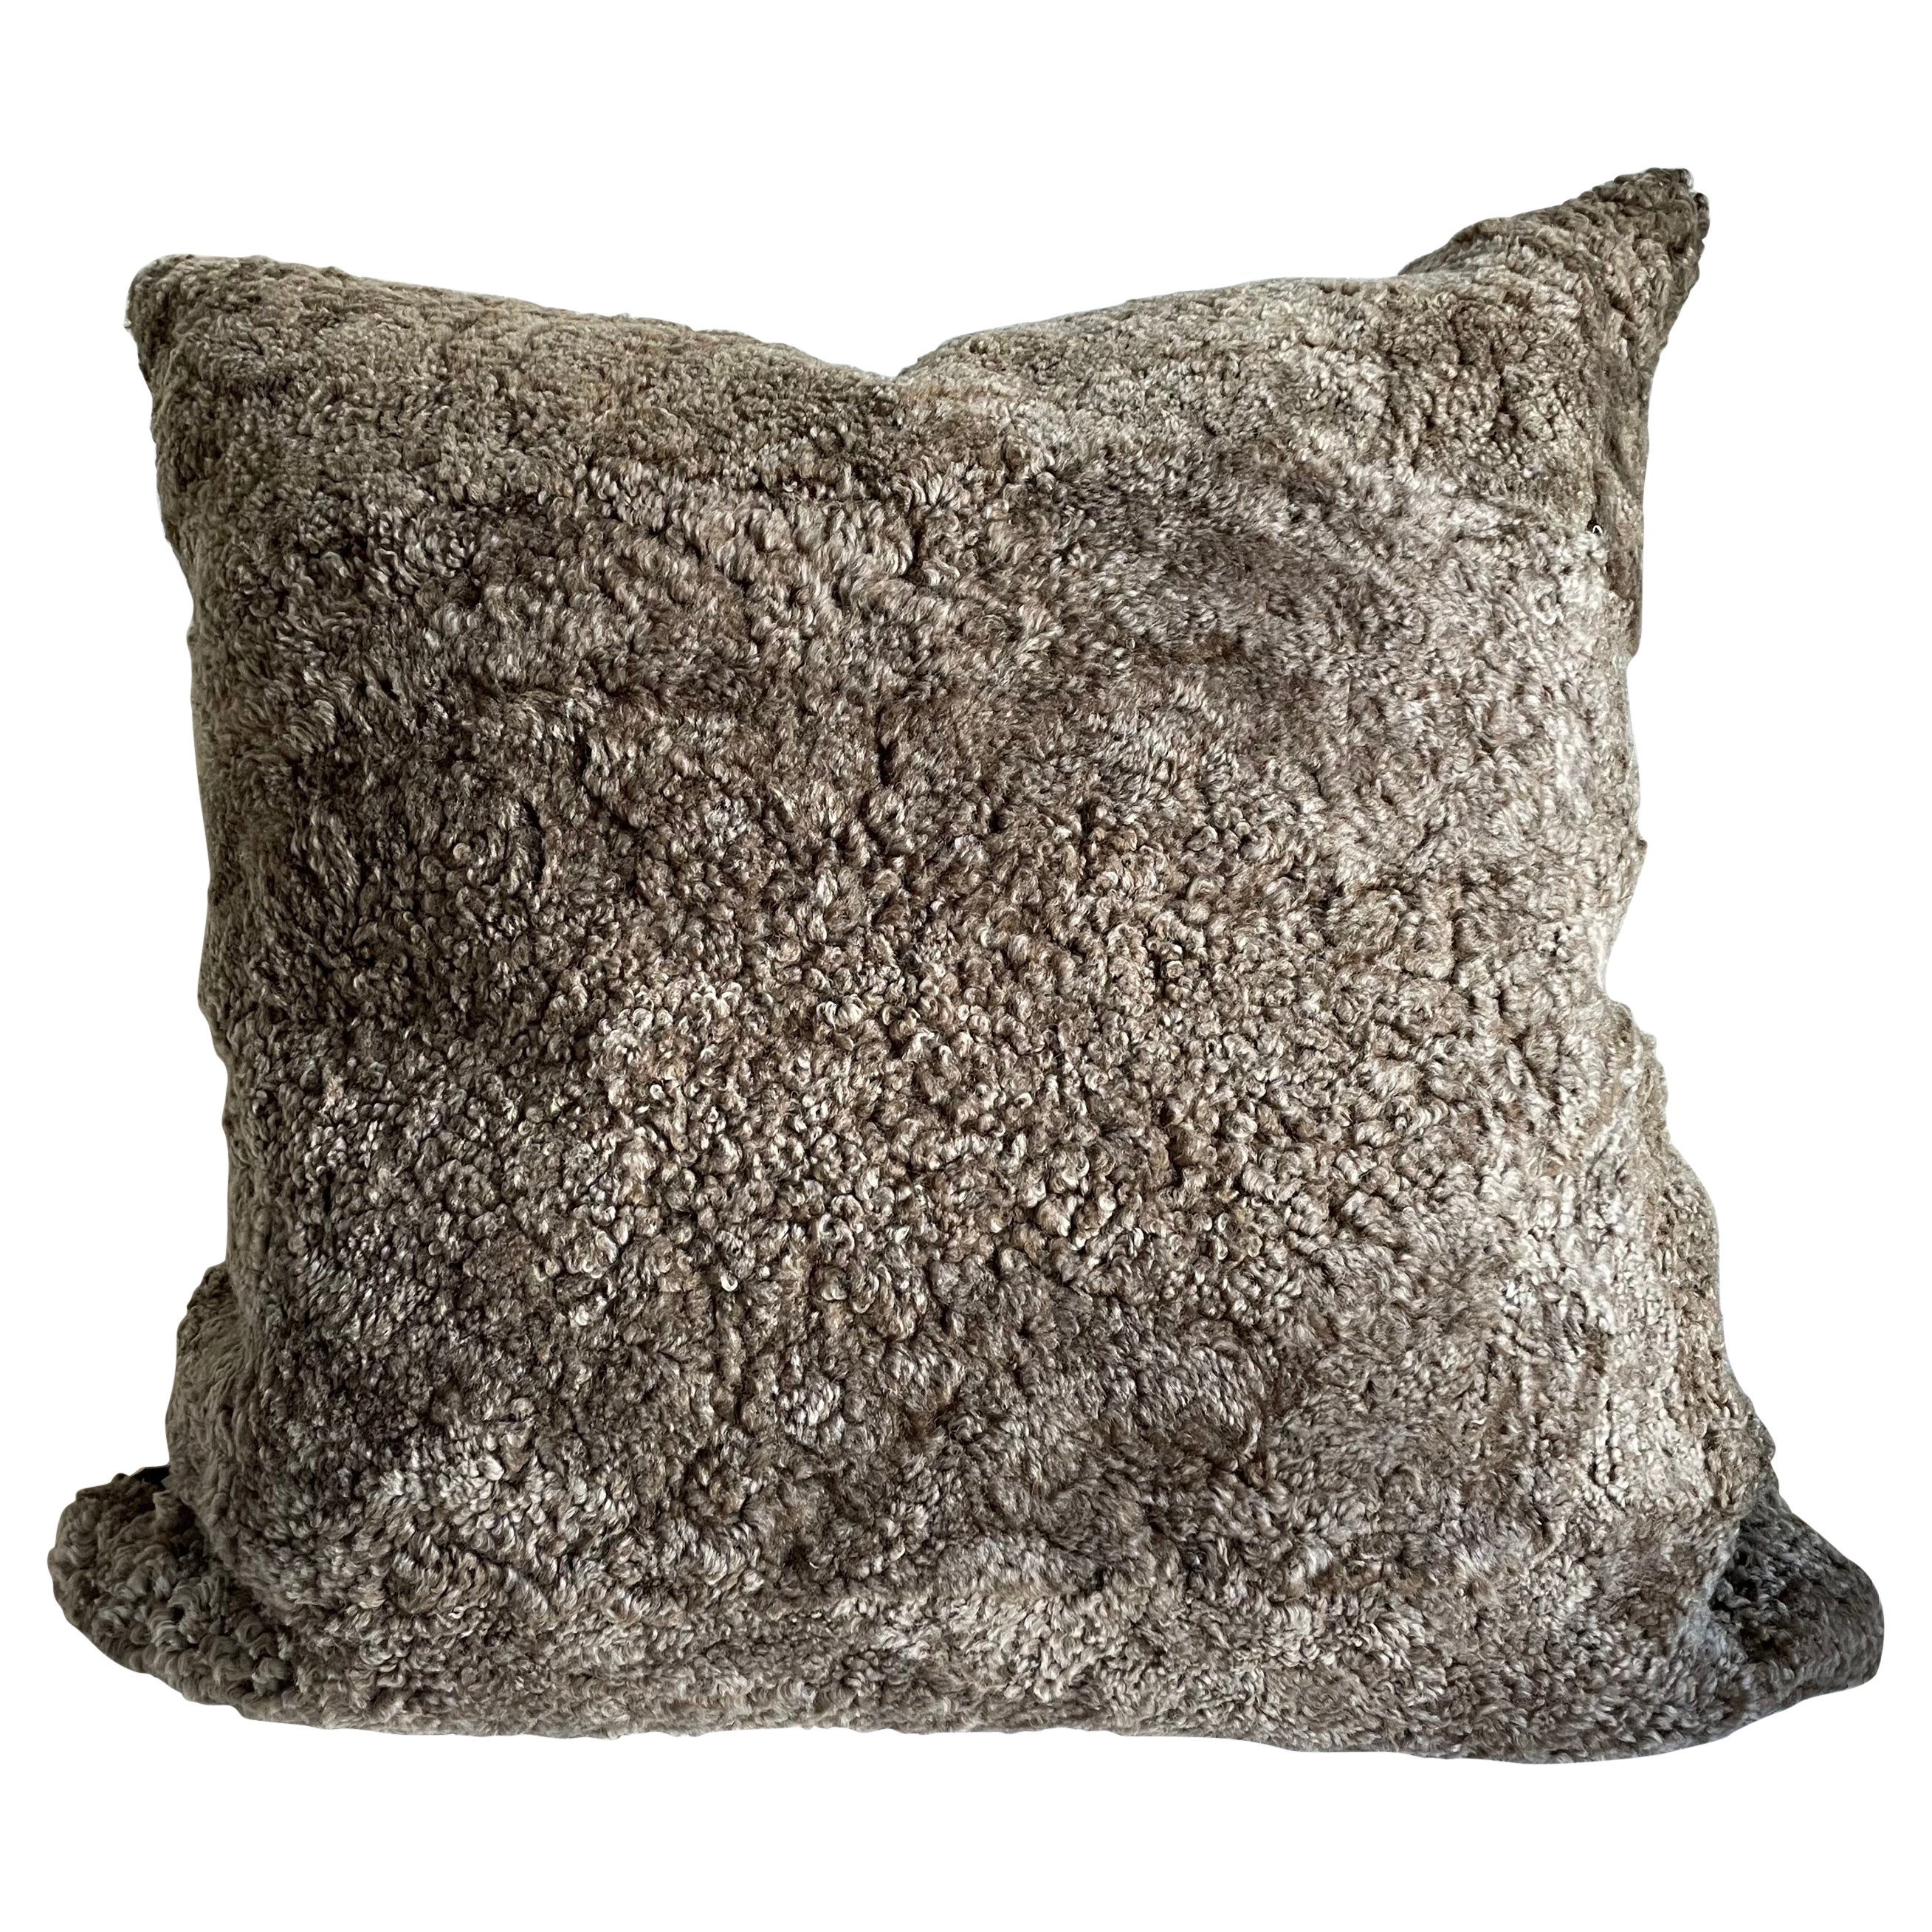 Genuine Plush Curly Sheepskin Accent Pillow For Sale